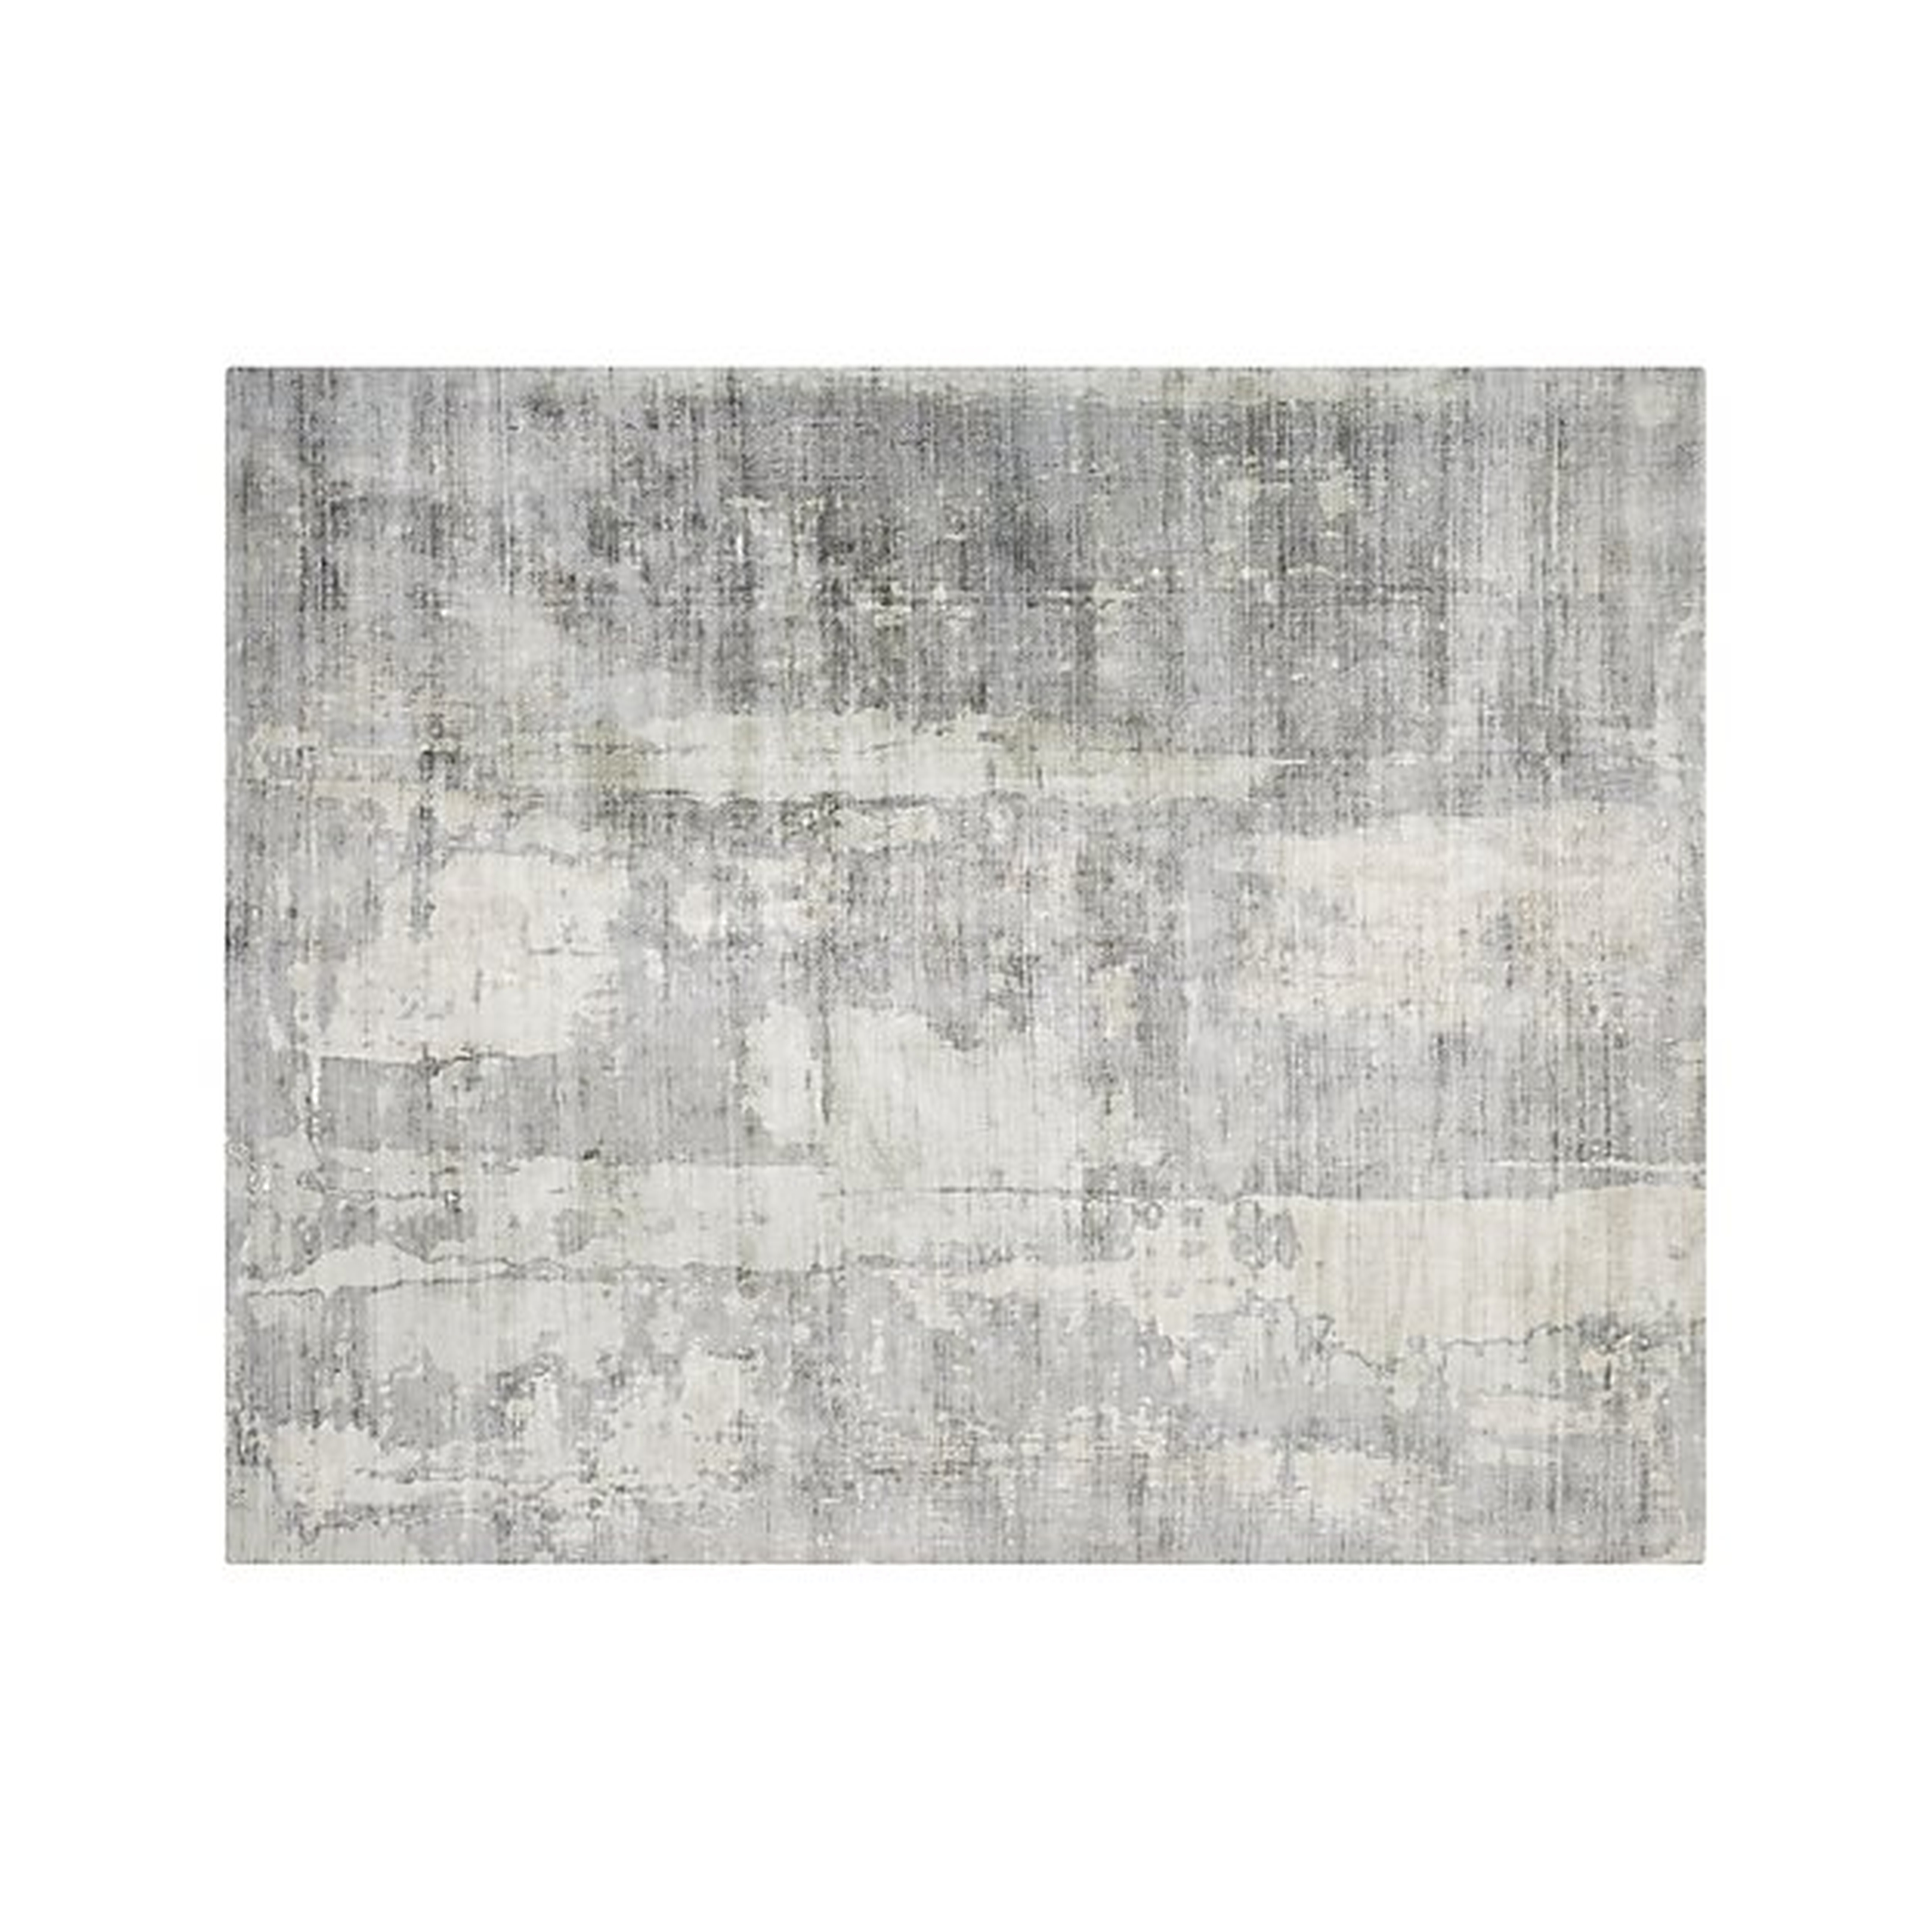 Tottori Abstract Rug 8'x10' - Crate and Barrel